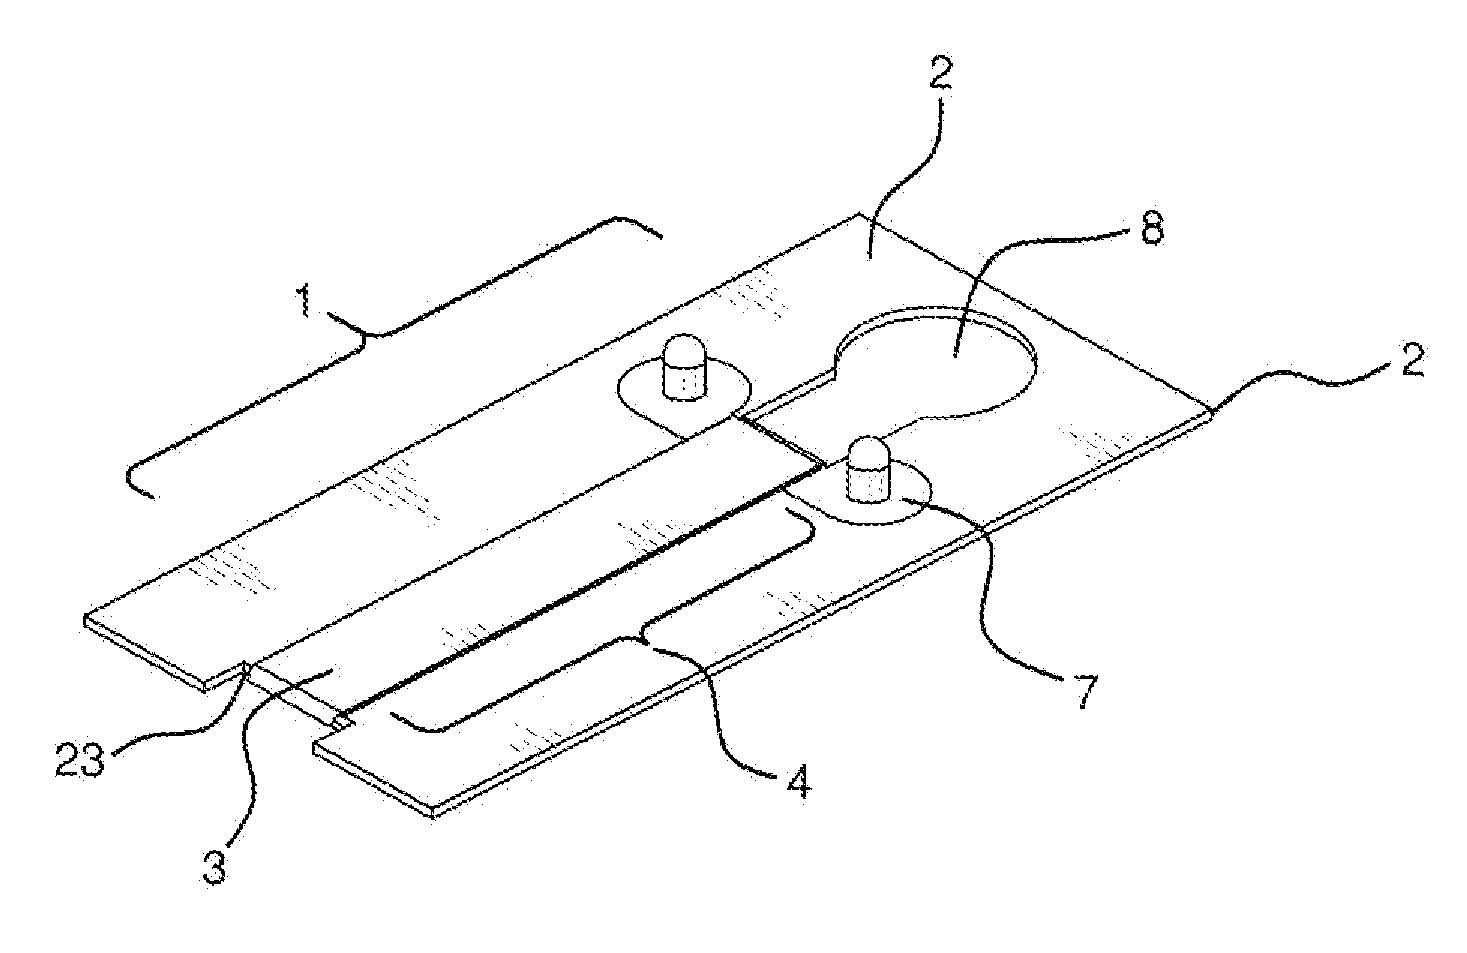 Apparatus for Supplying Surgical Staple Line Reinforcement